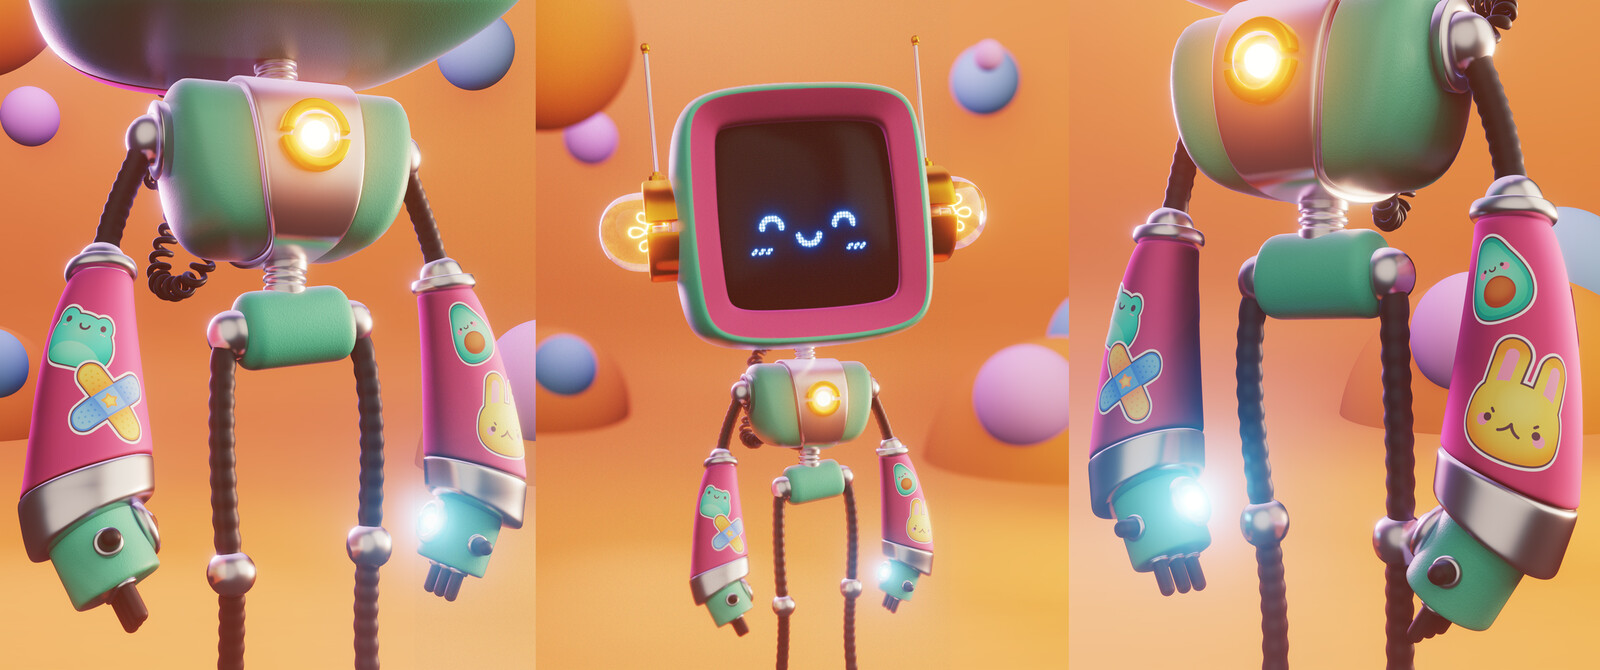 First render test of the Robot in Blender and some close-ups of the stickers